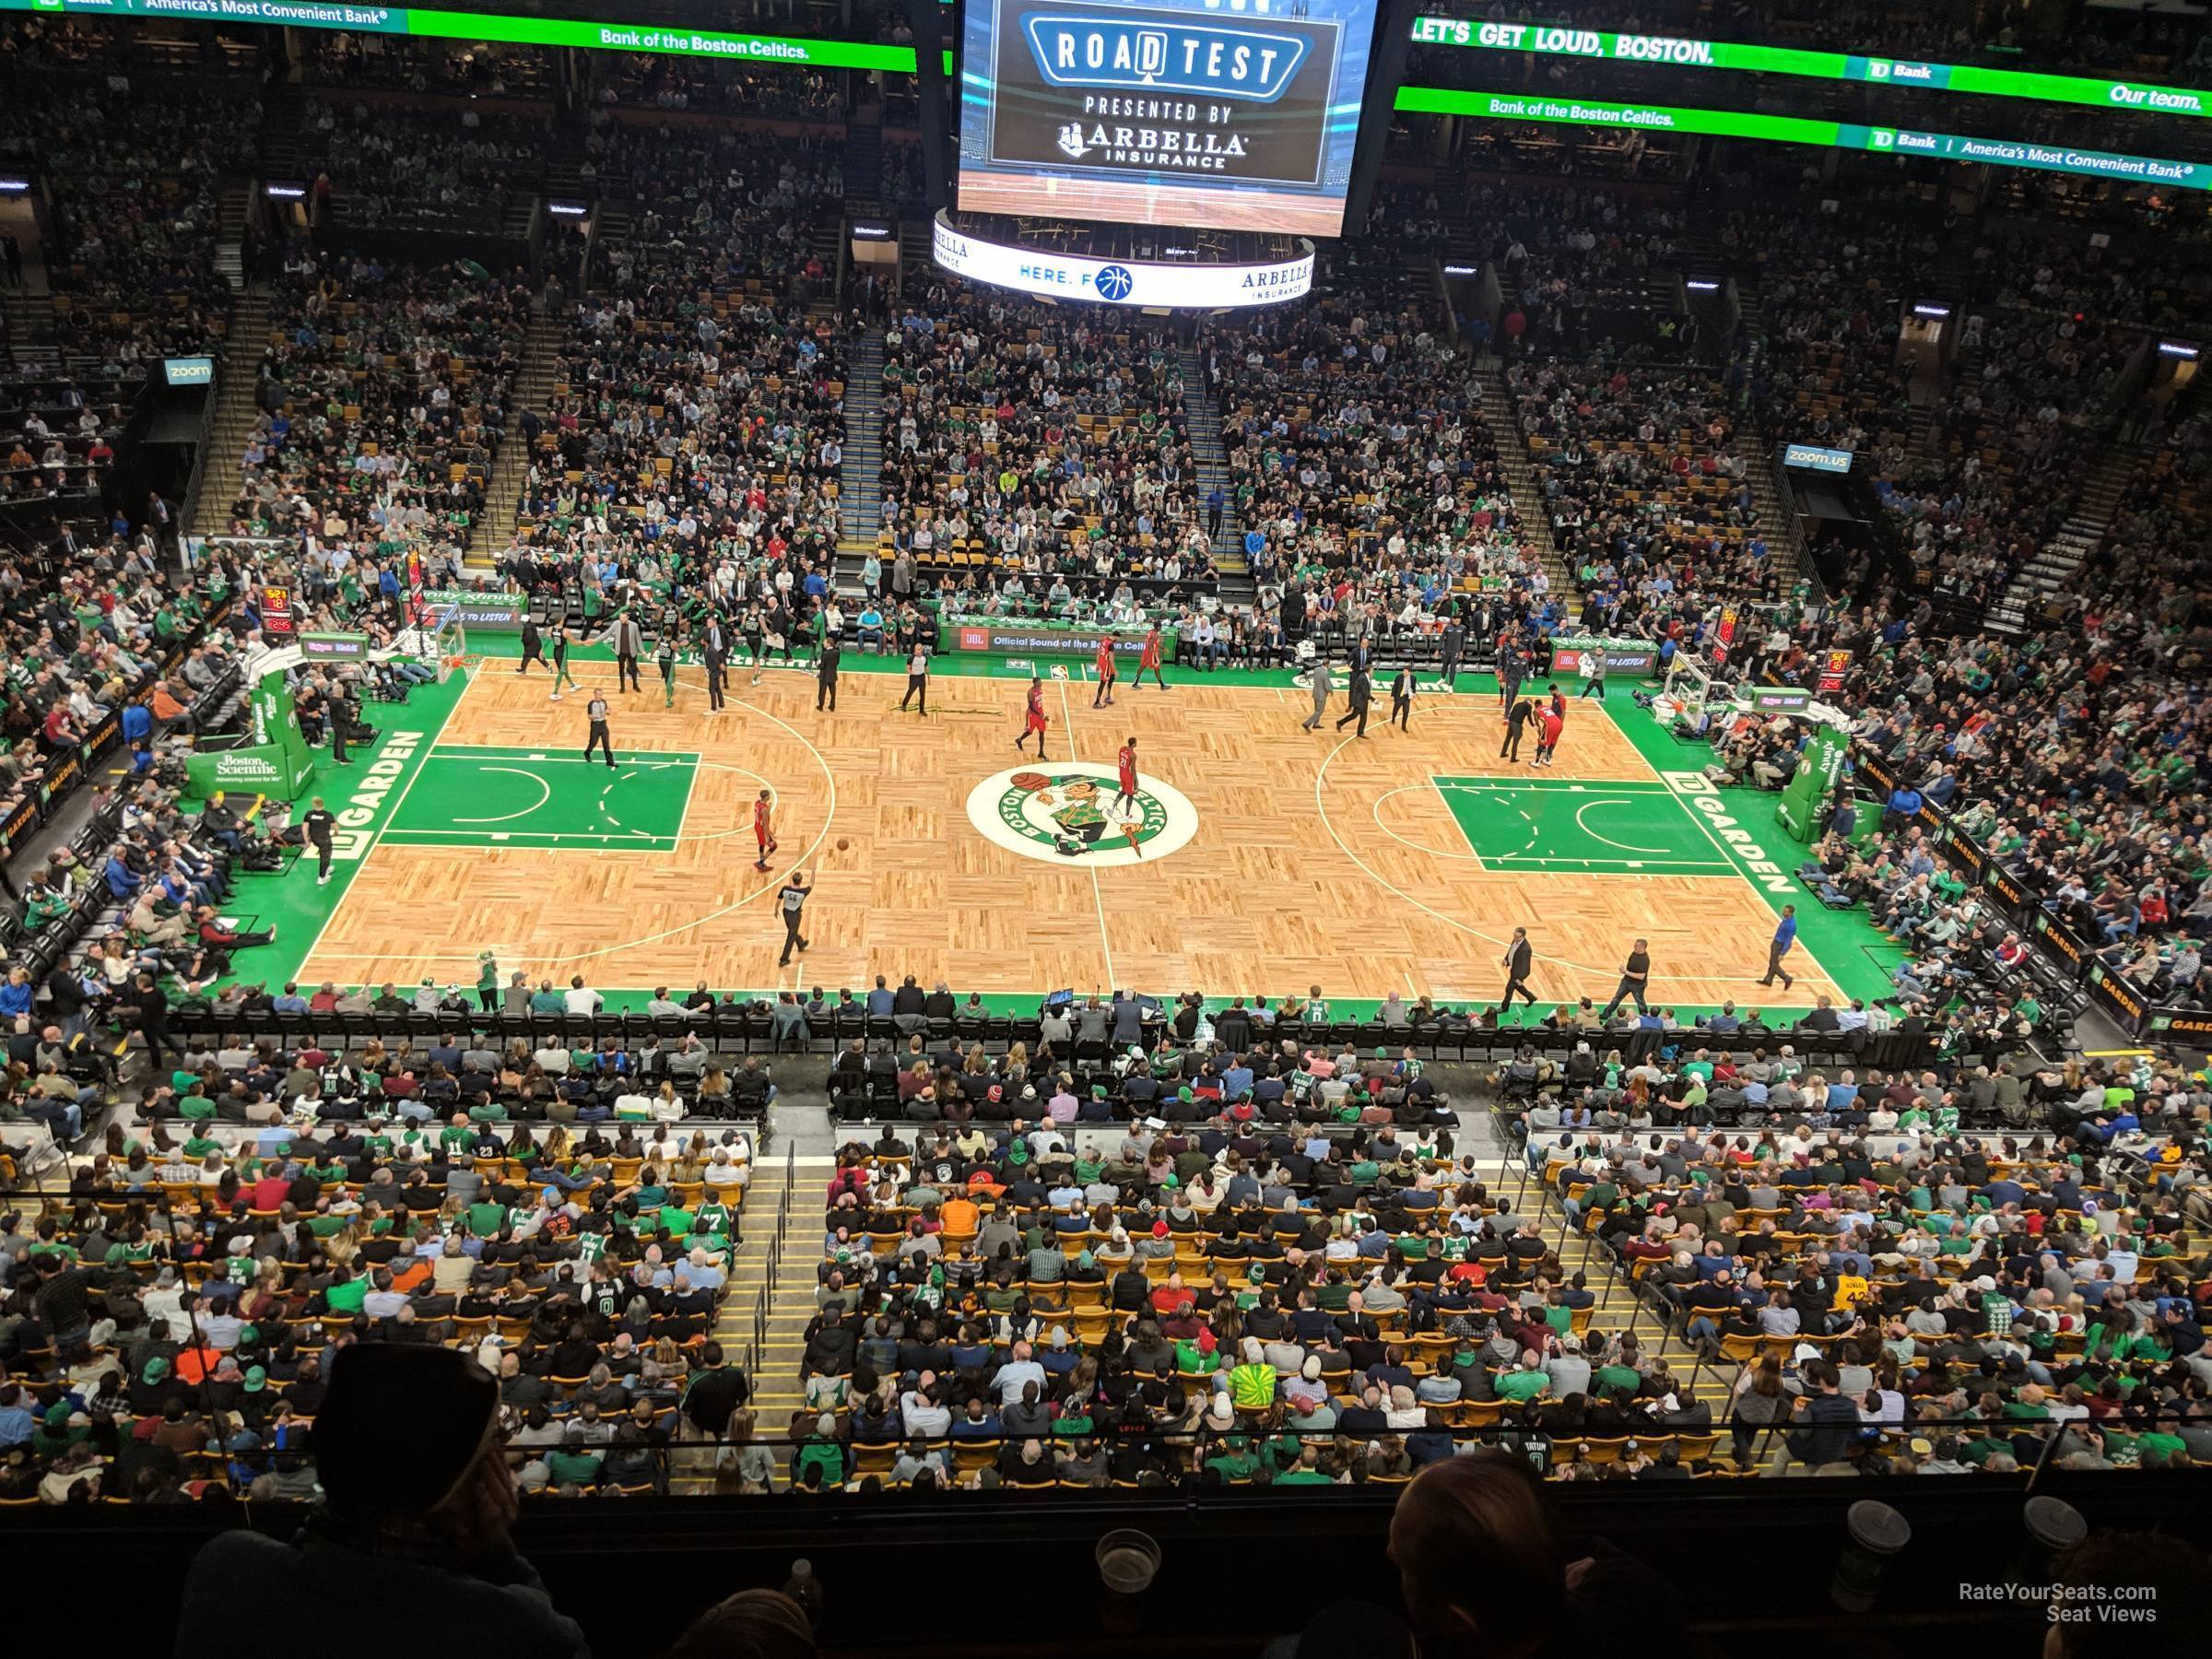 section 316, row 3 seat view  for basketball - td garden